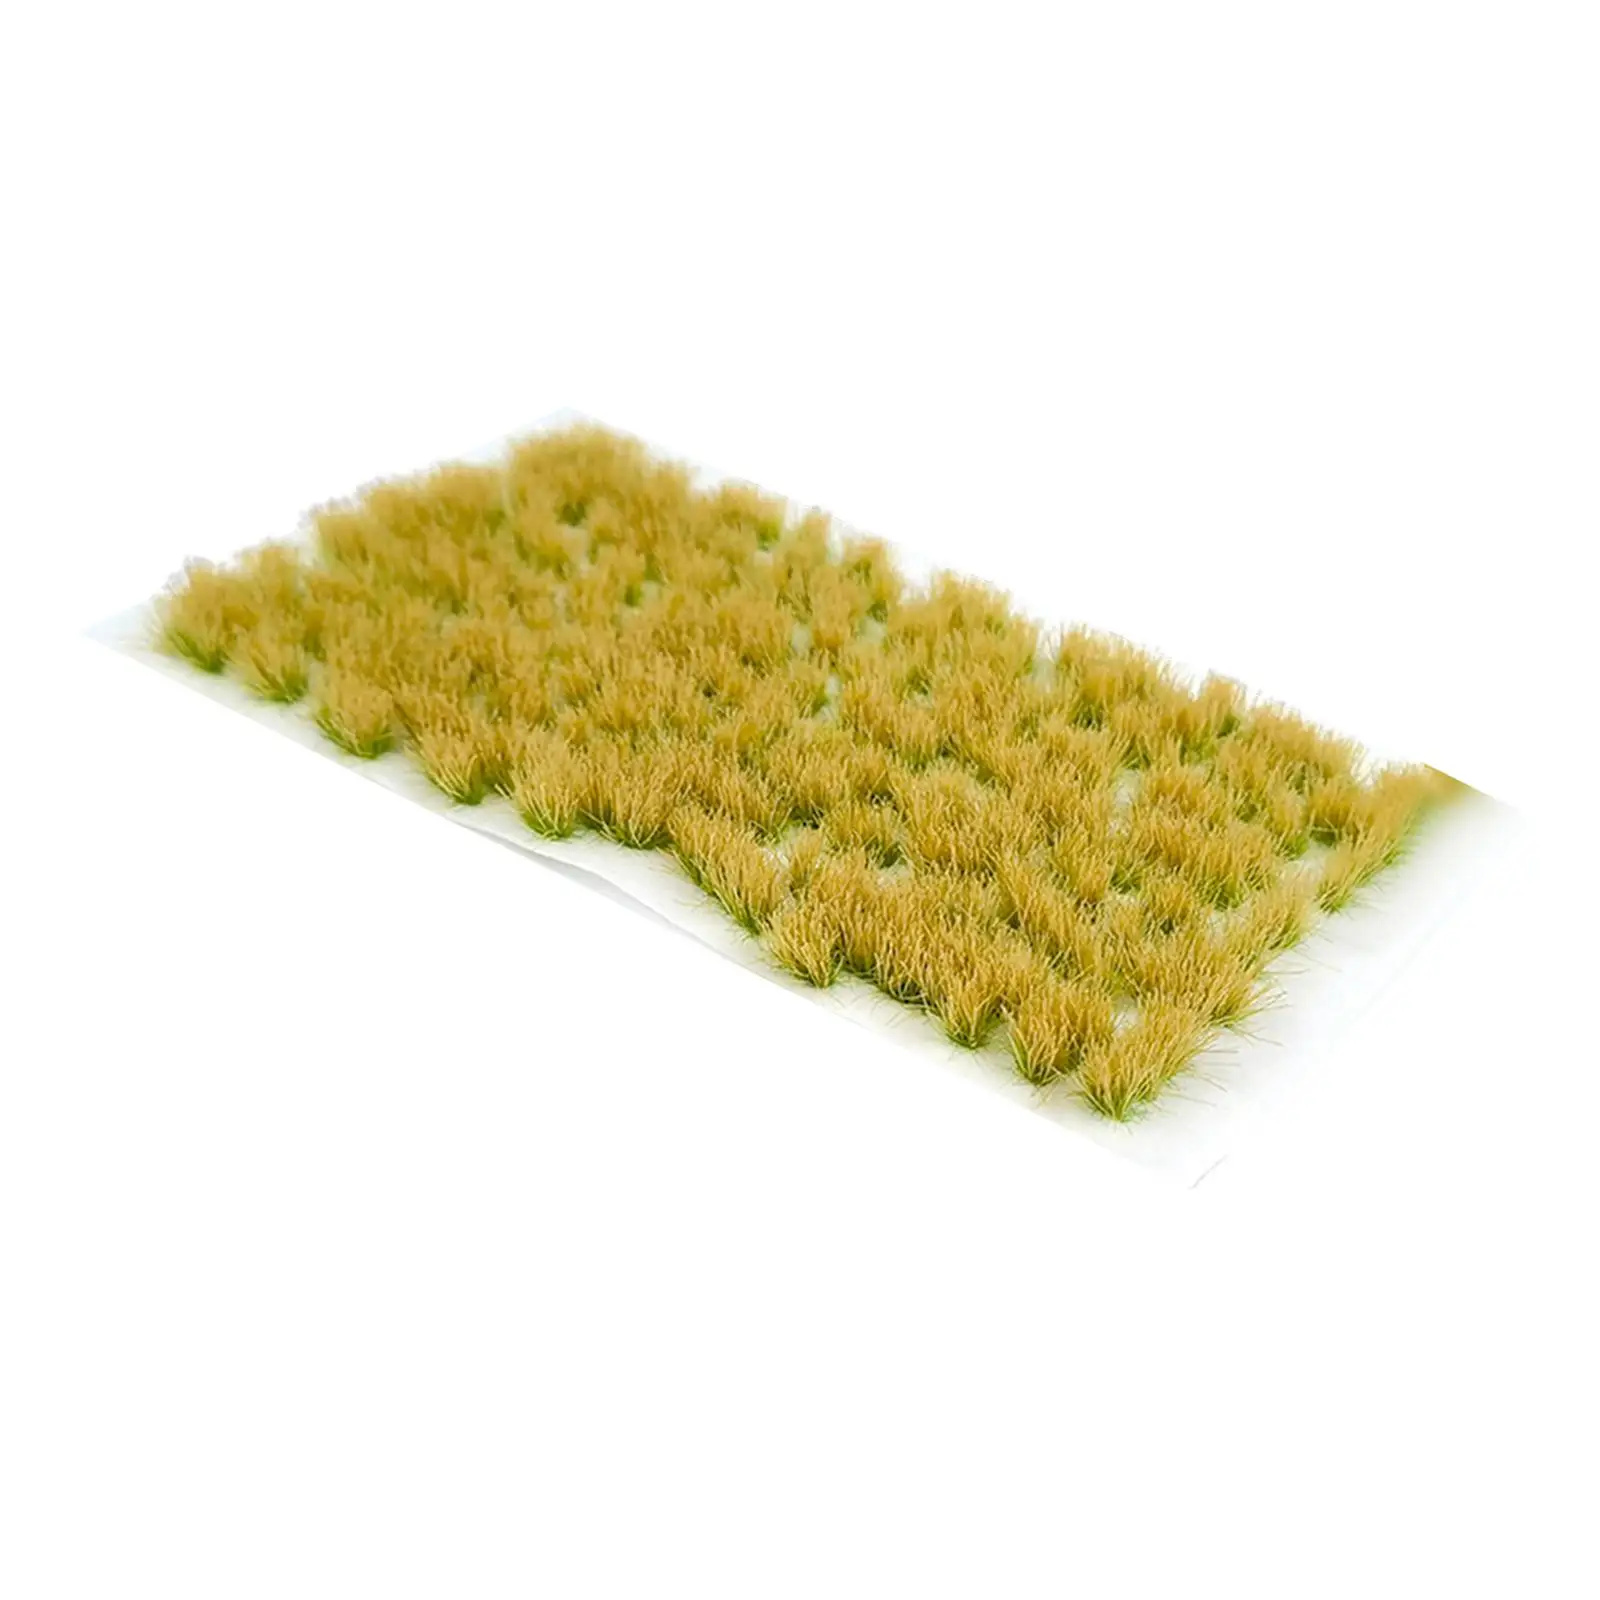 95x Large Cluster Grass Sand Table Miniature Scene Static Scenery Model for Architecture